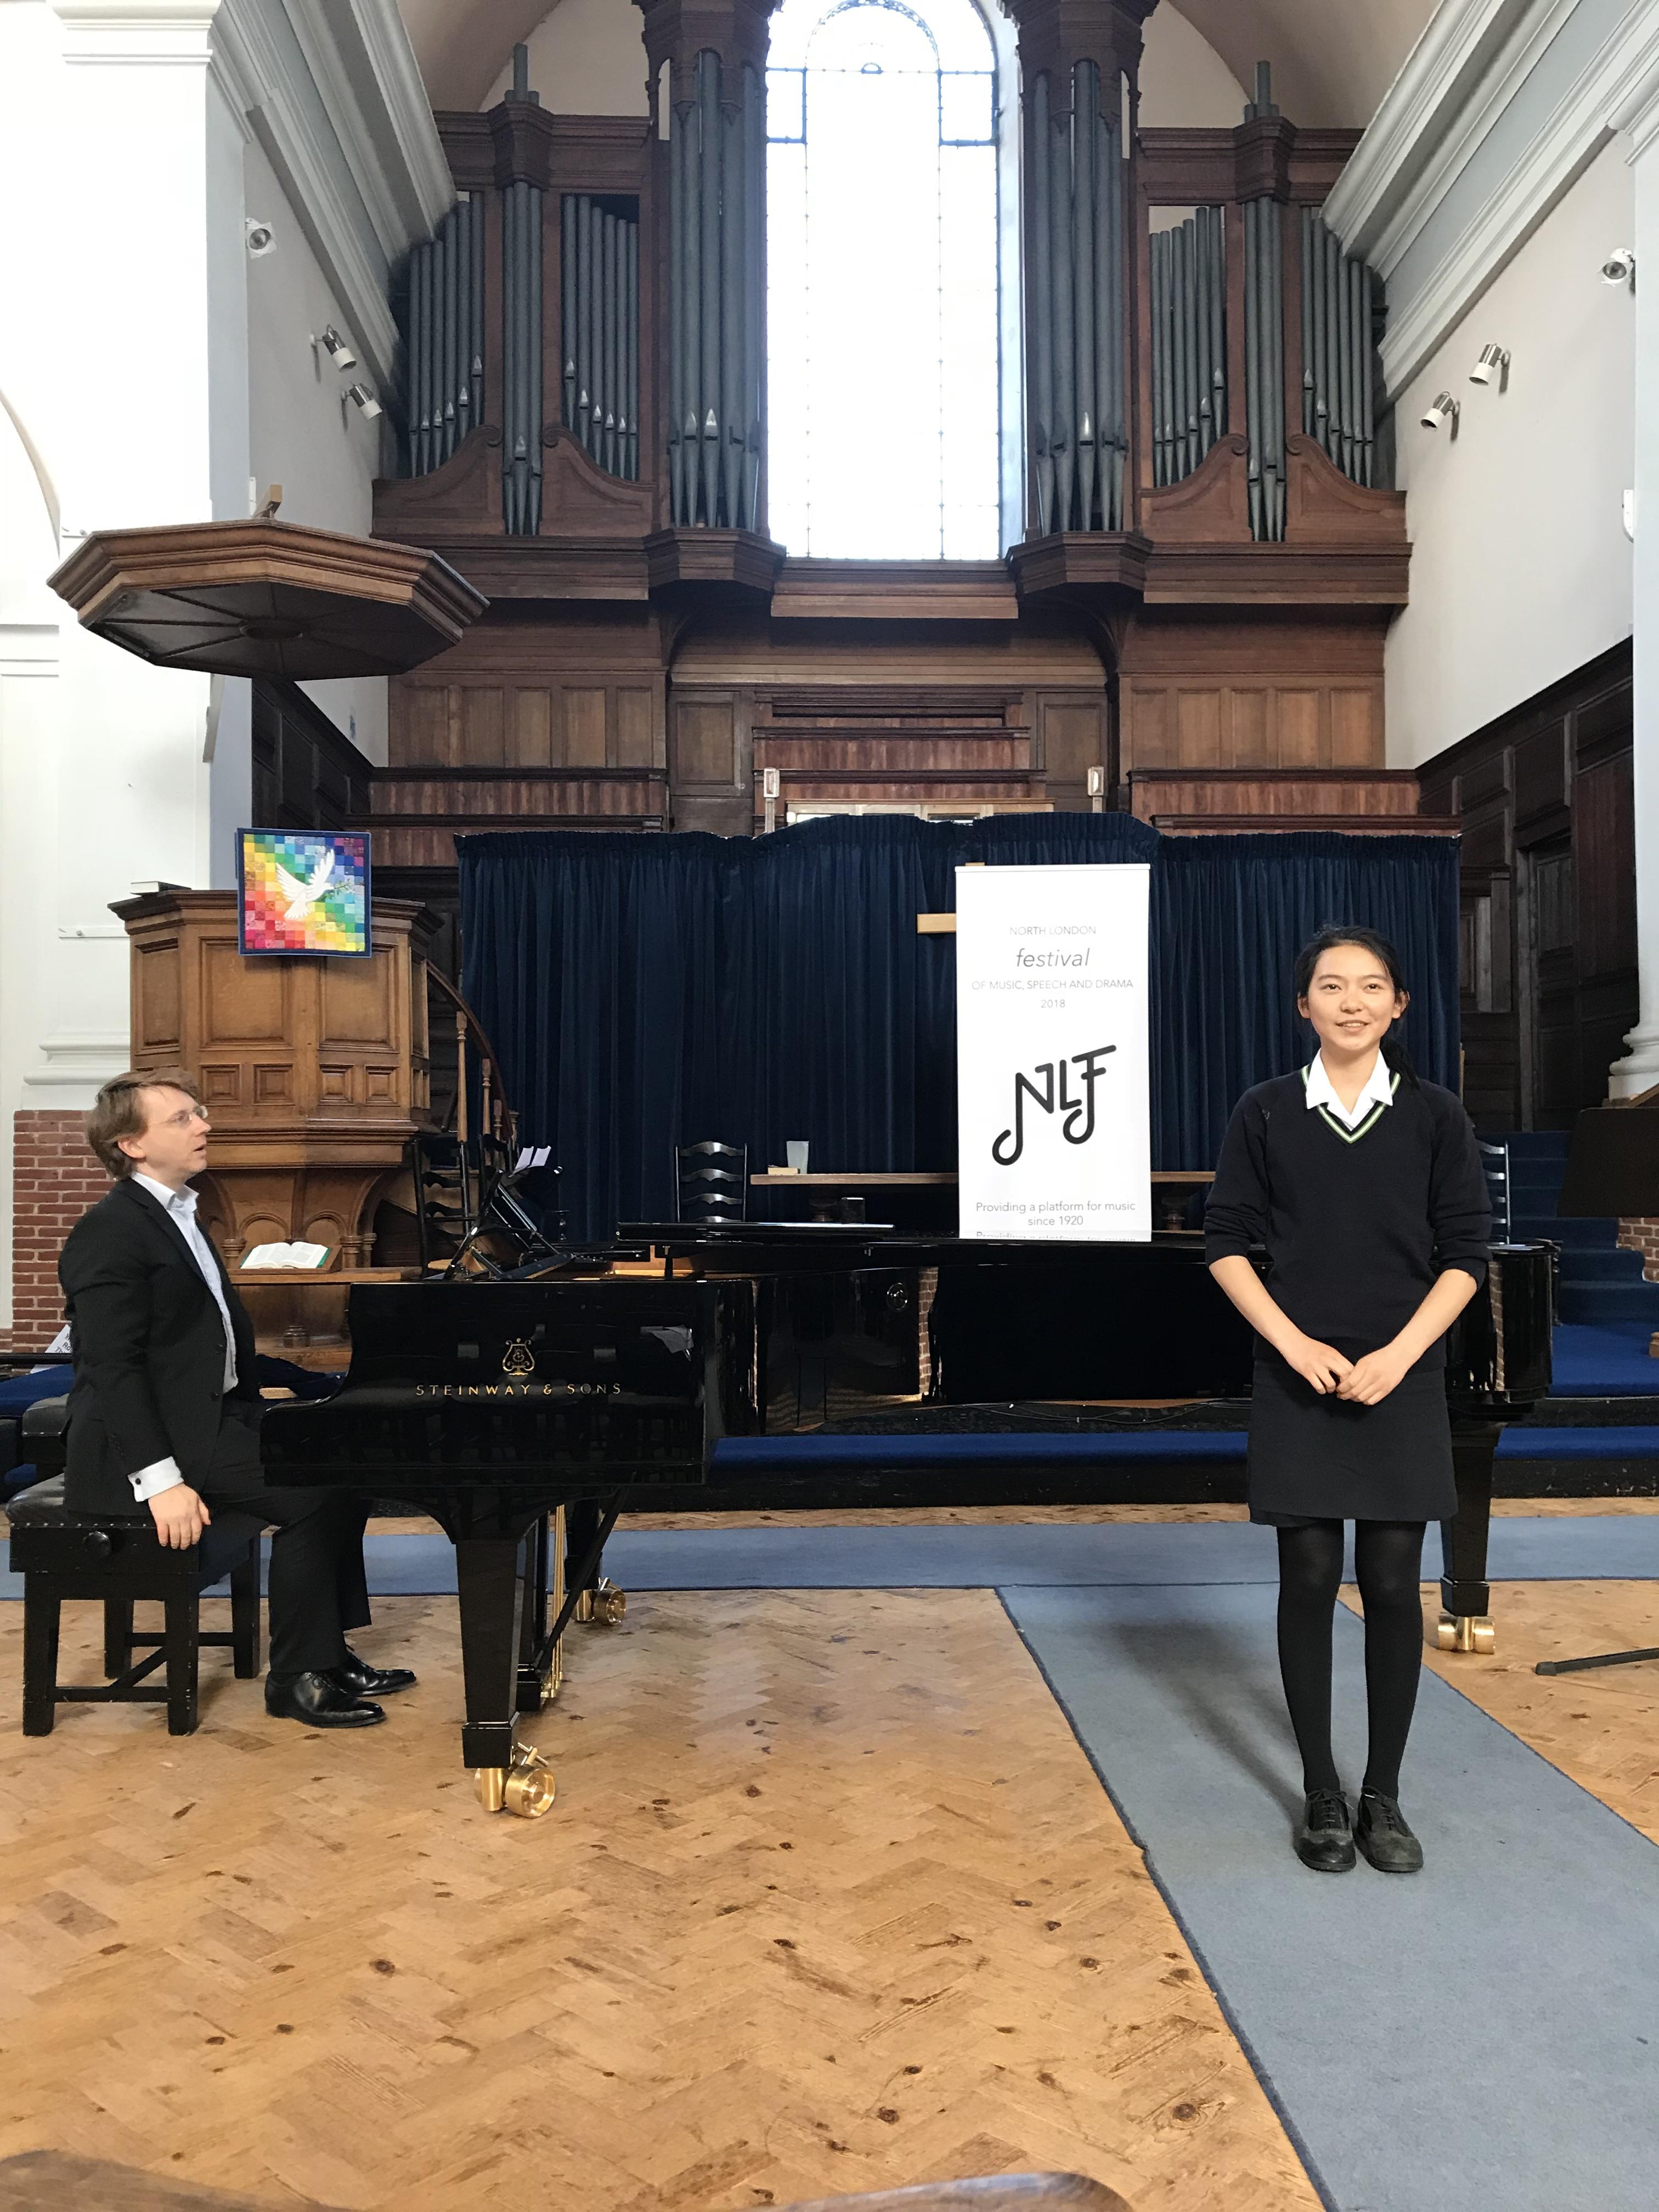 1st place for Sonia in the North London Music Festival